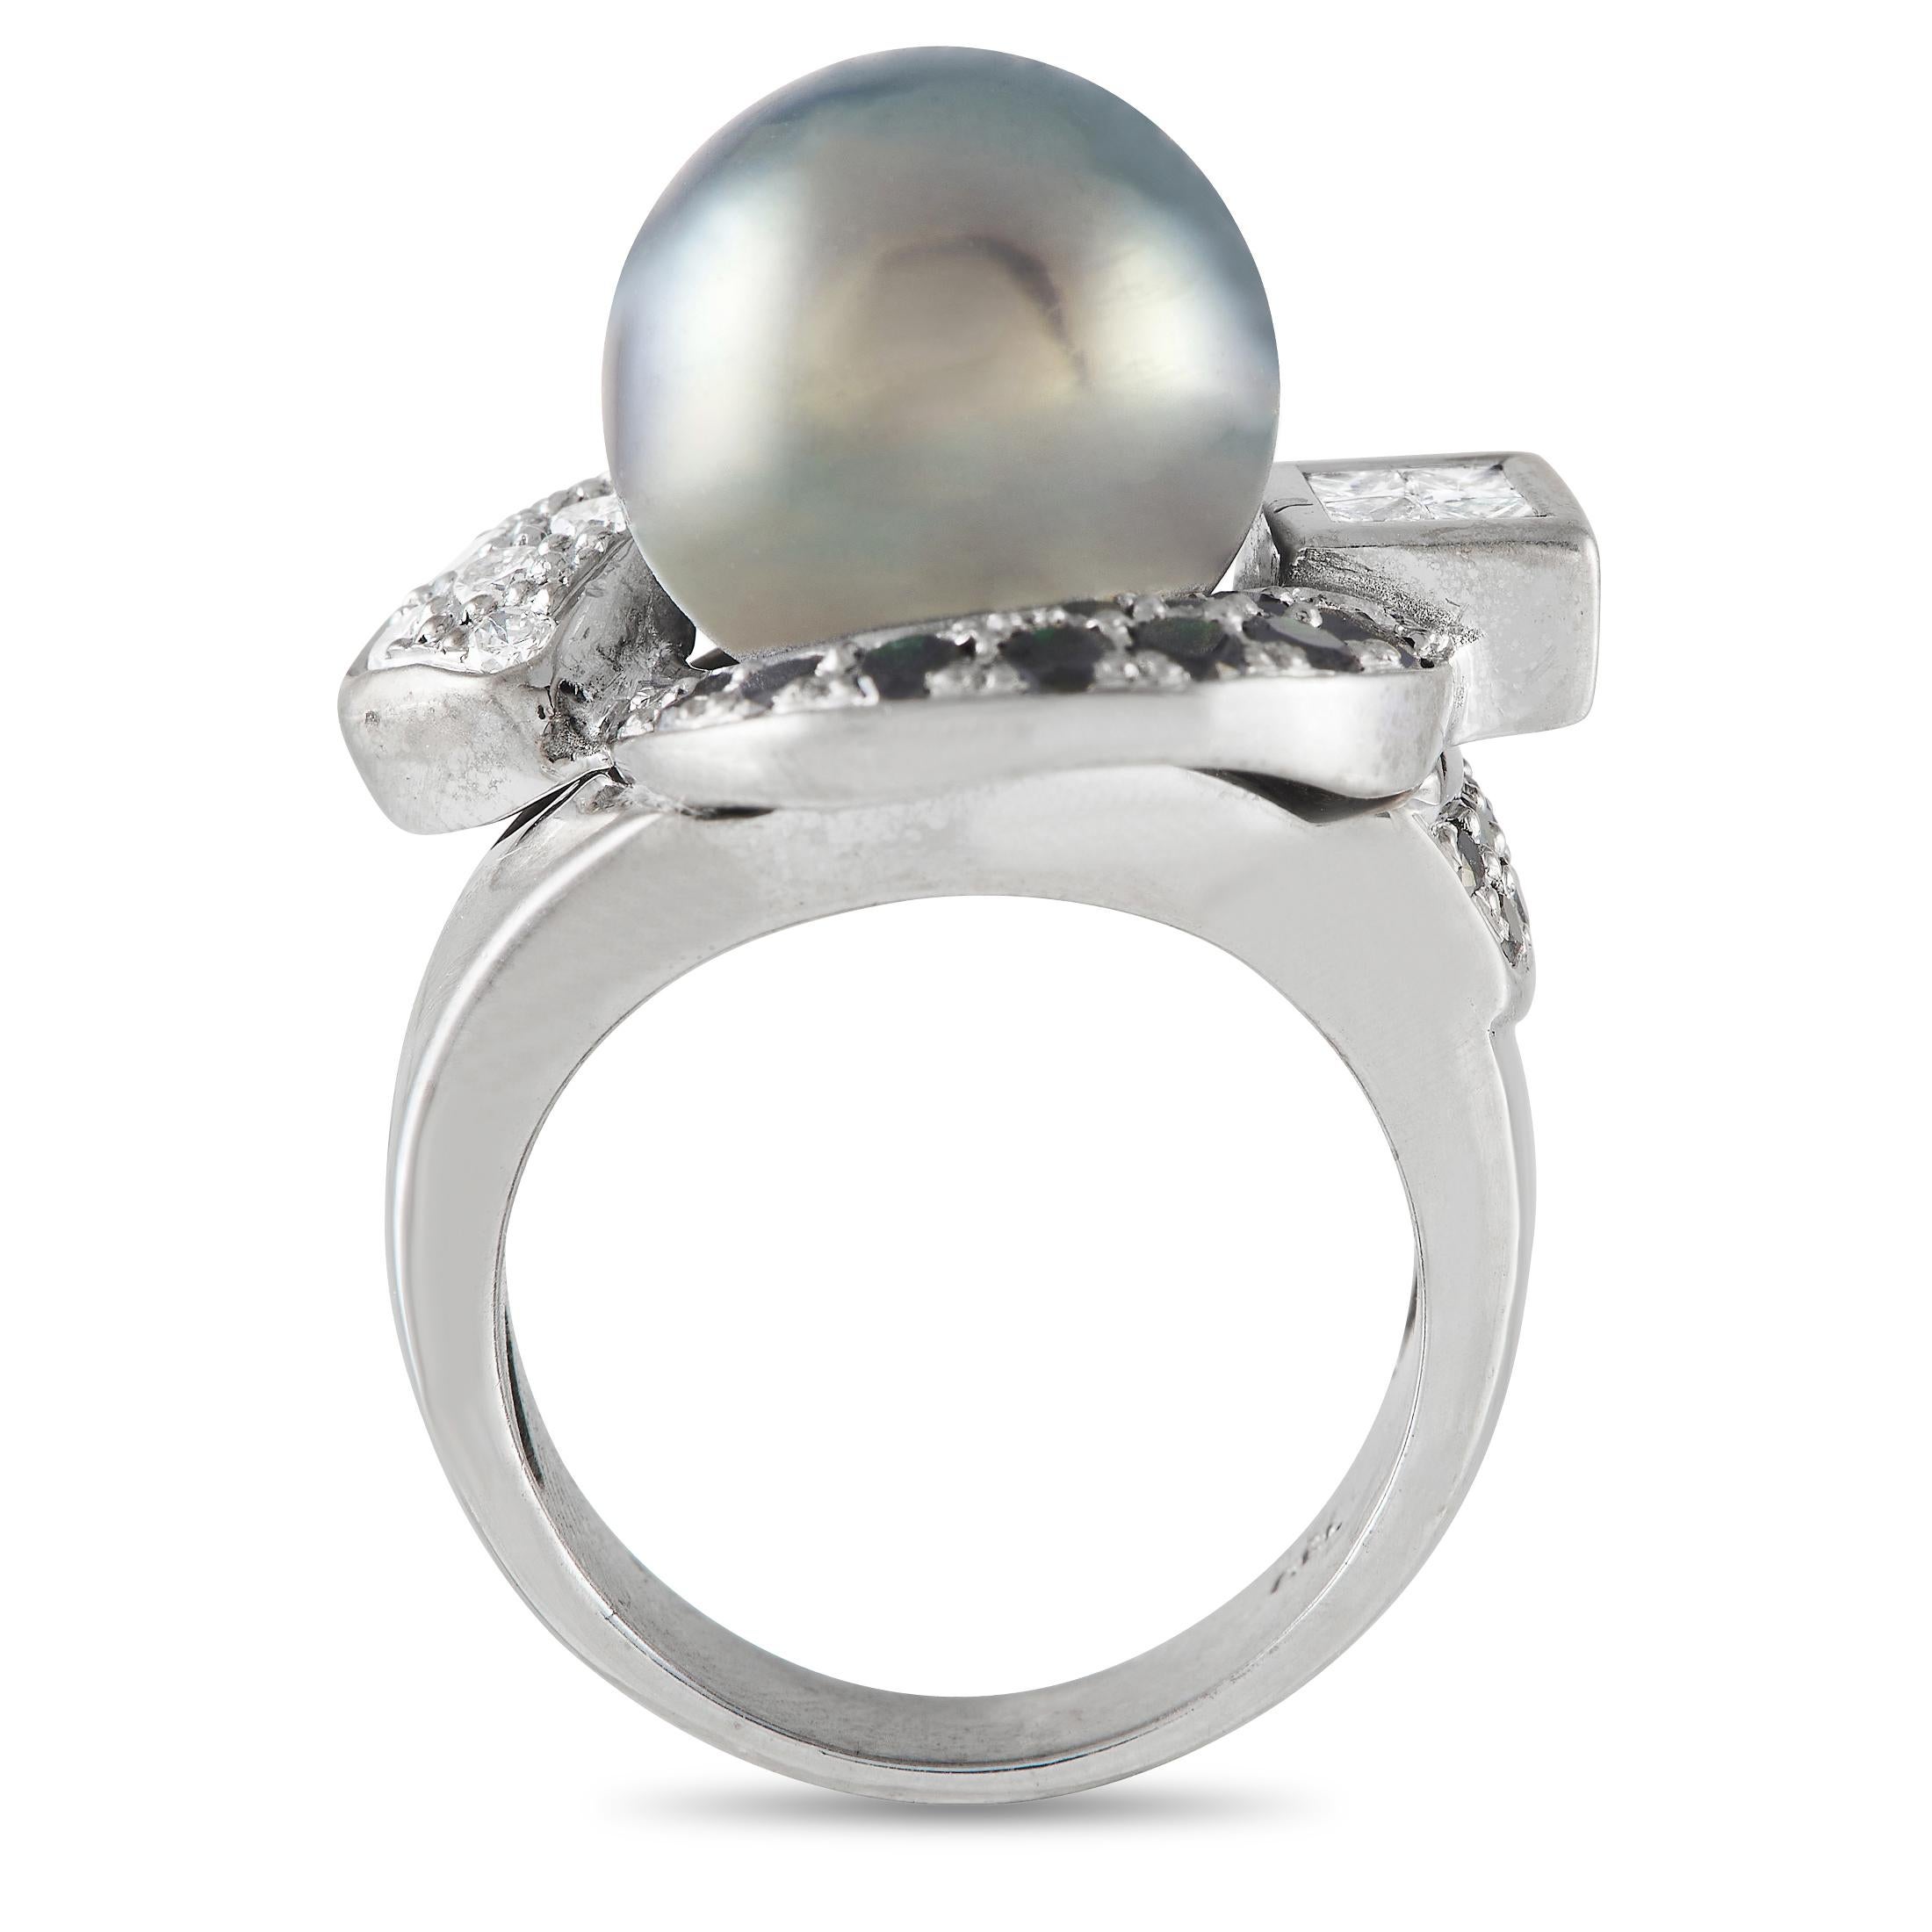 A bold, captivating design makes this ring an artistic piece of jewelry that will continually catch the eye. At the center of the creative 18K White Gold setting, a 12.5mm Tahitian pearl serves as a stunning focal point. White diamonds totaling 0.55